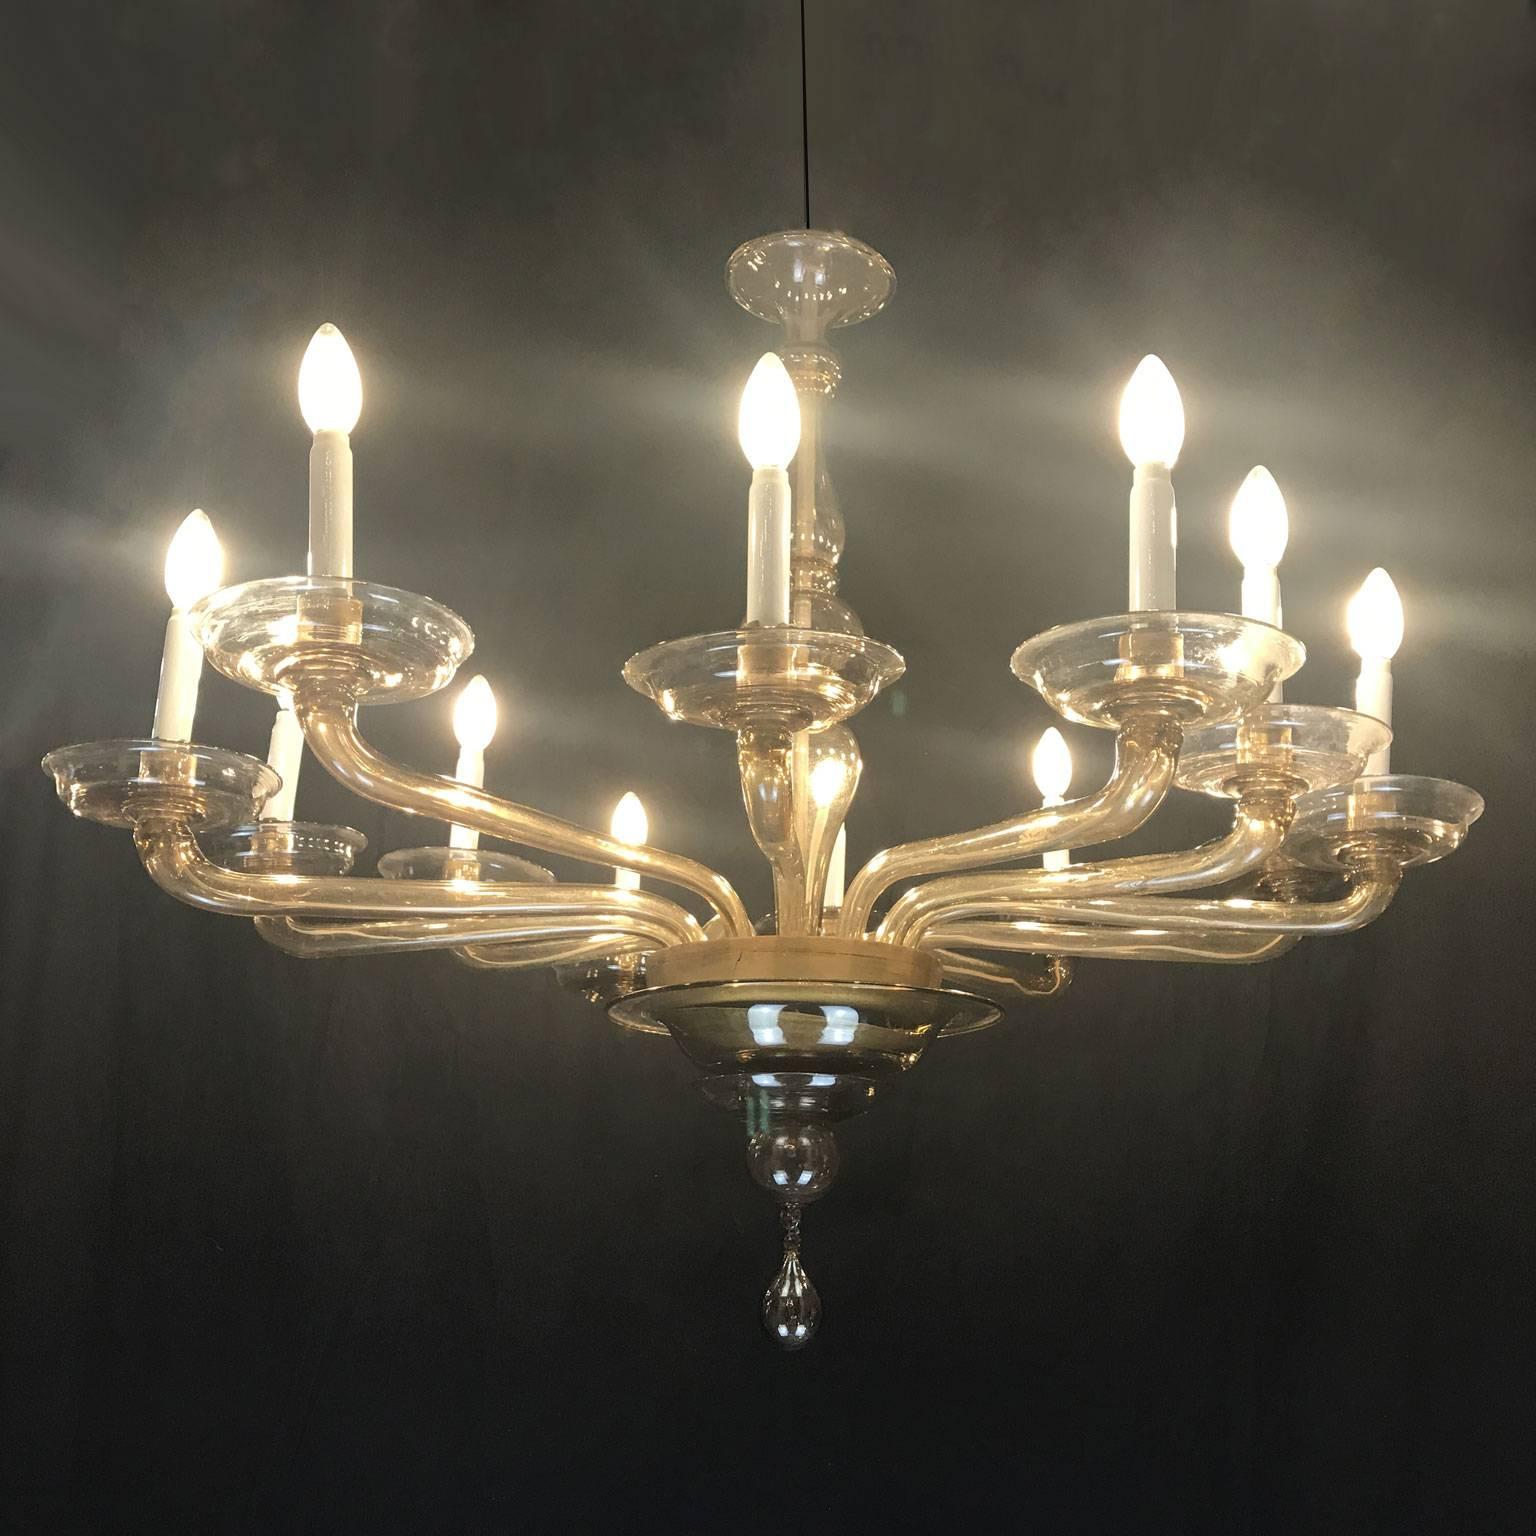 A Cristalleria Murano by Giuseppe Toso Murano blown glass chandelier, a 1940s Venetian Murano smoked blown glass twelve-light chandelier, marked in the large central cup with the rooster brand by Cristalleria Murano. See picture detail.

Located in